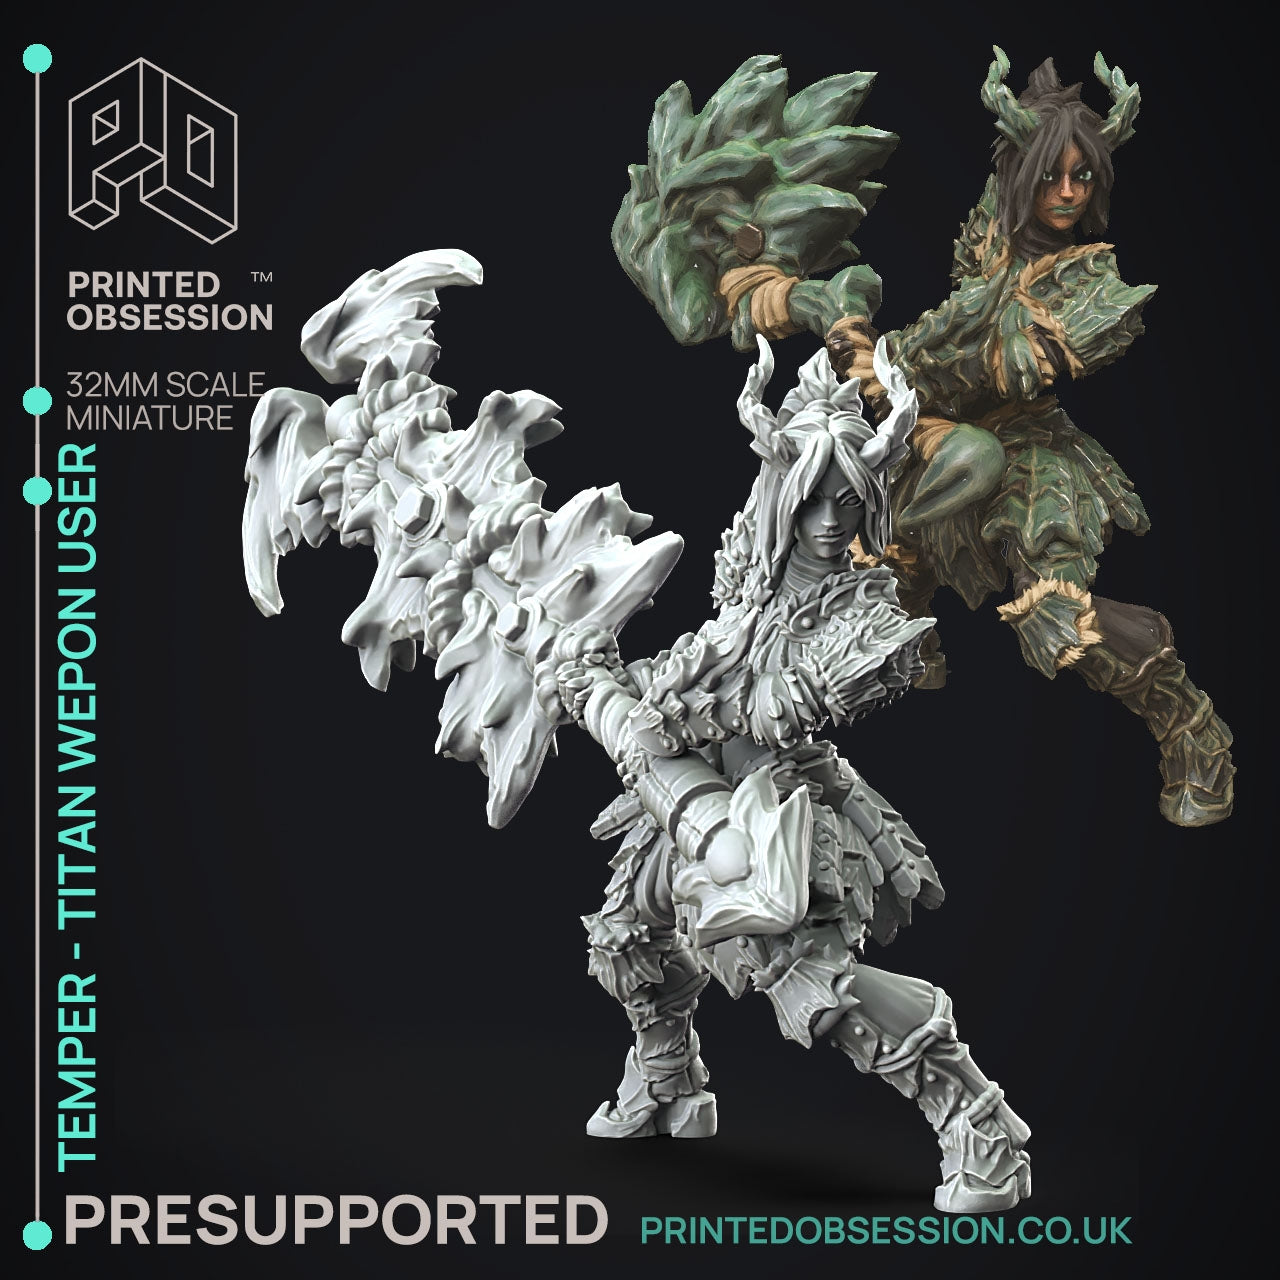 Temper Titan Weapon Wielder - The Printed Obsession - Table-top mini, 3D Printed Collectable for painting and playing!